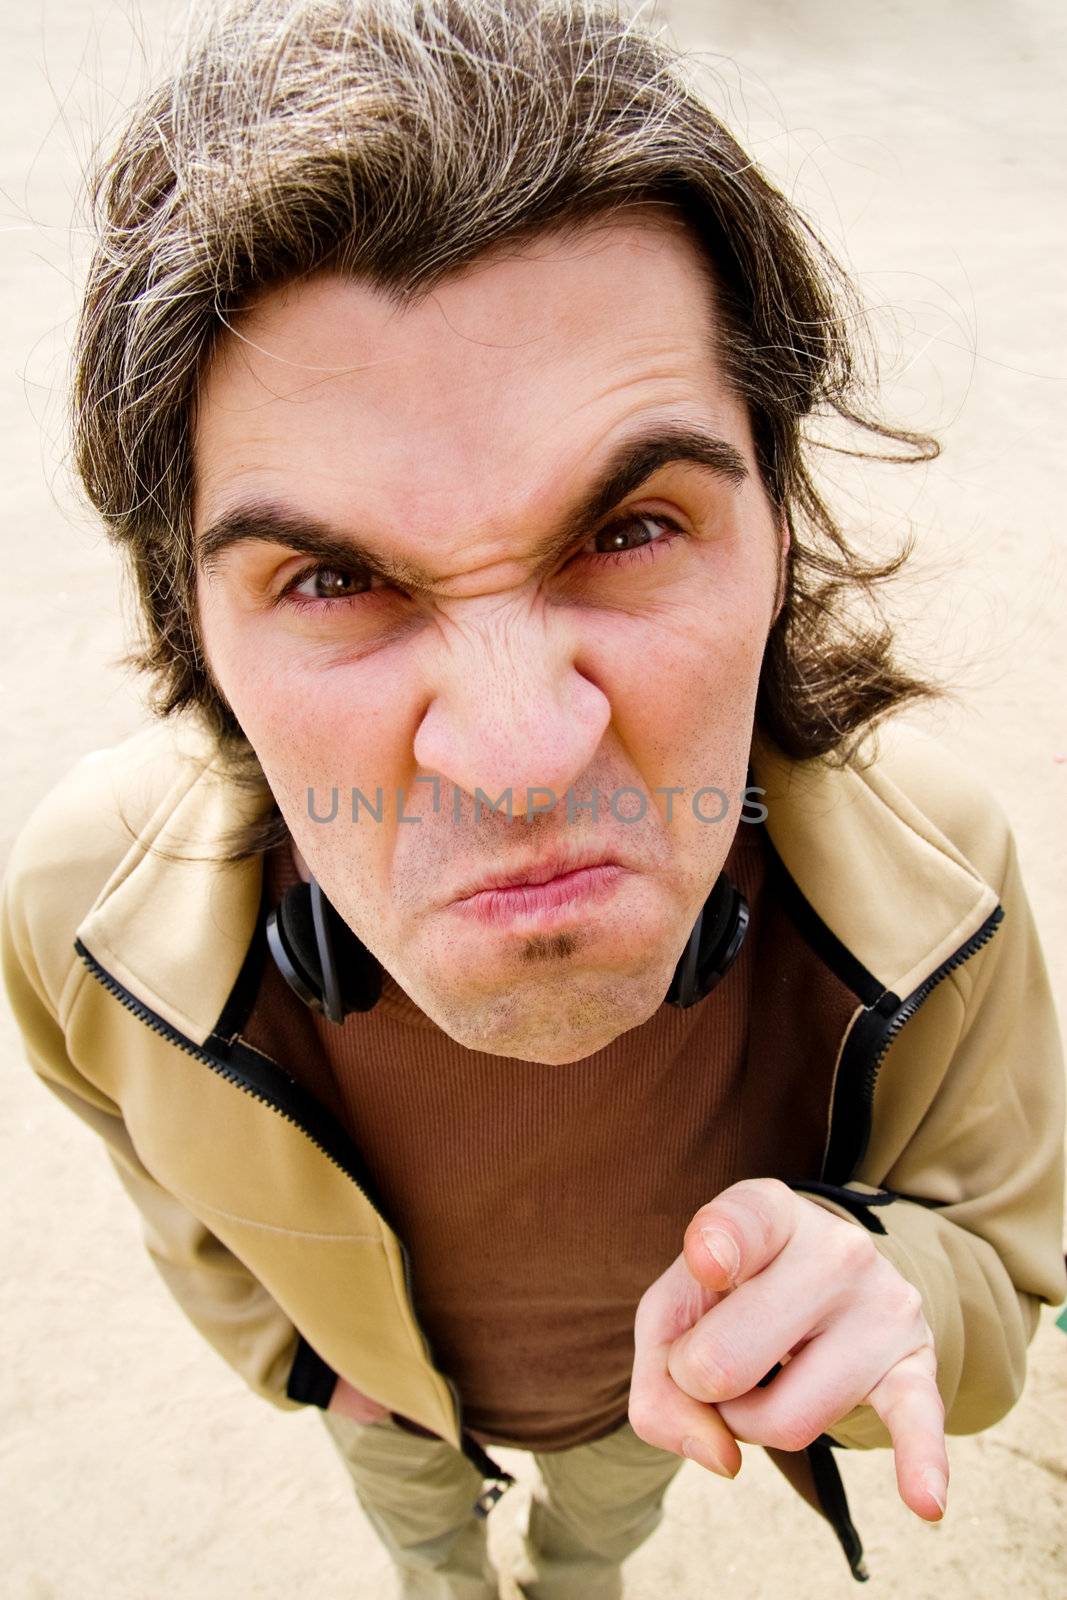 Funny man shot from above with wide-angle lens looks angrily and sticks two fingers into camera